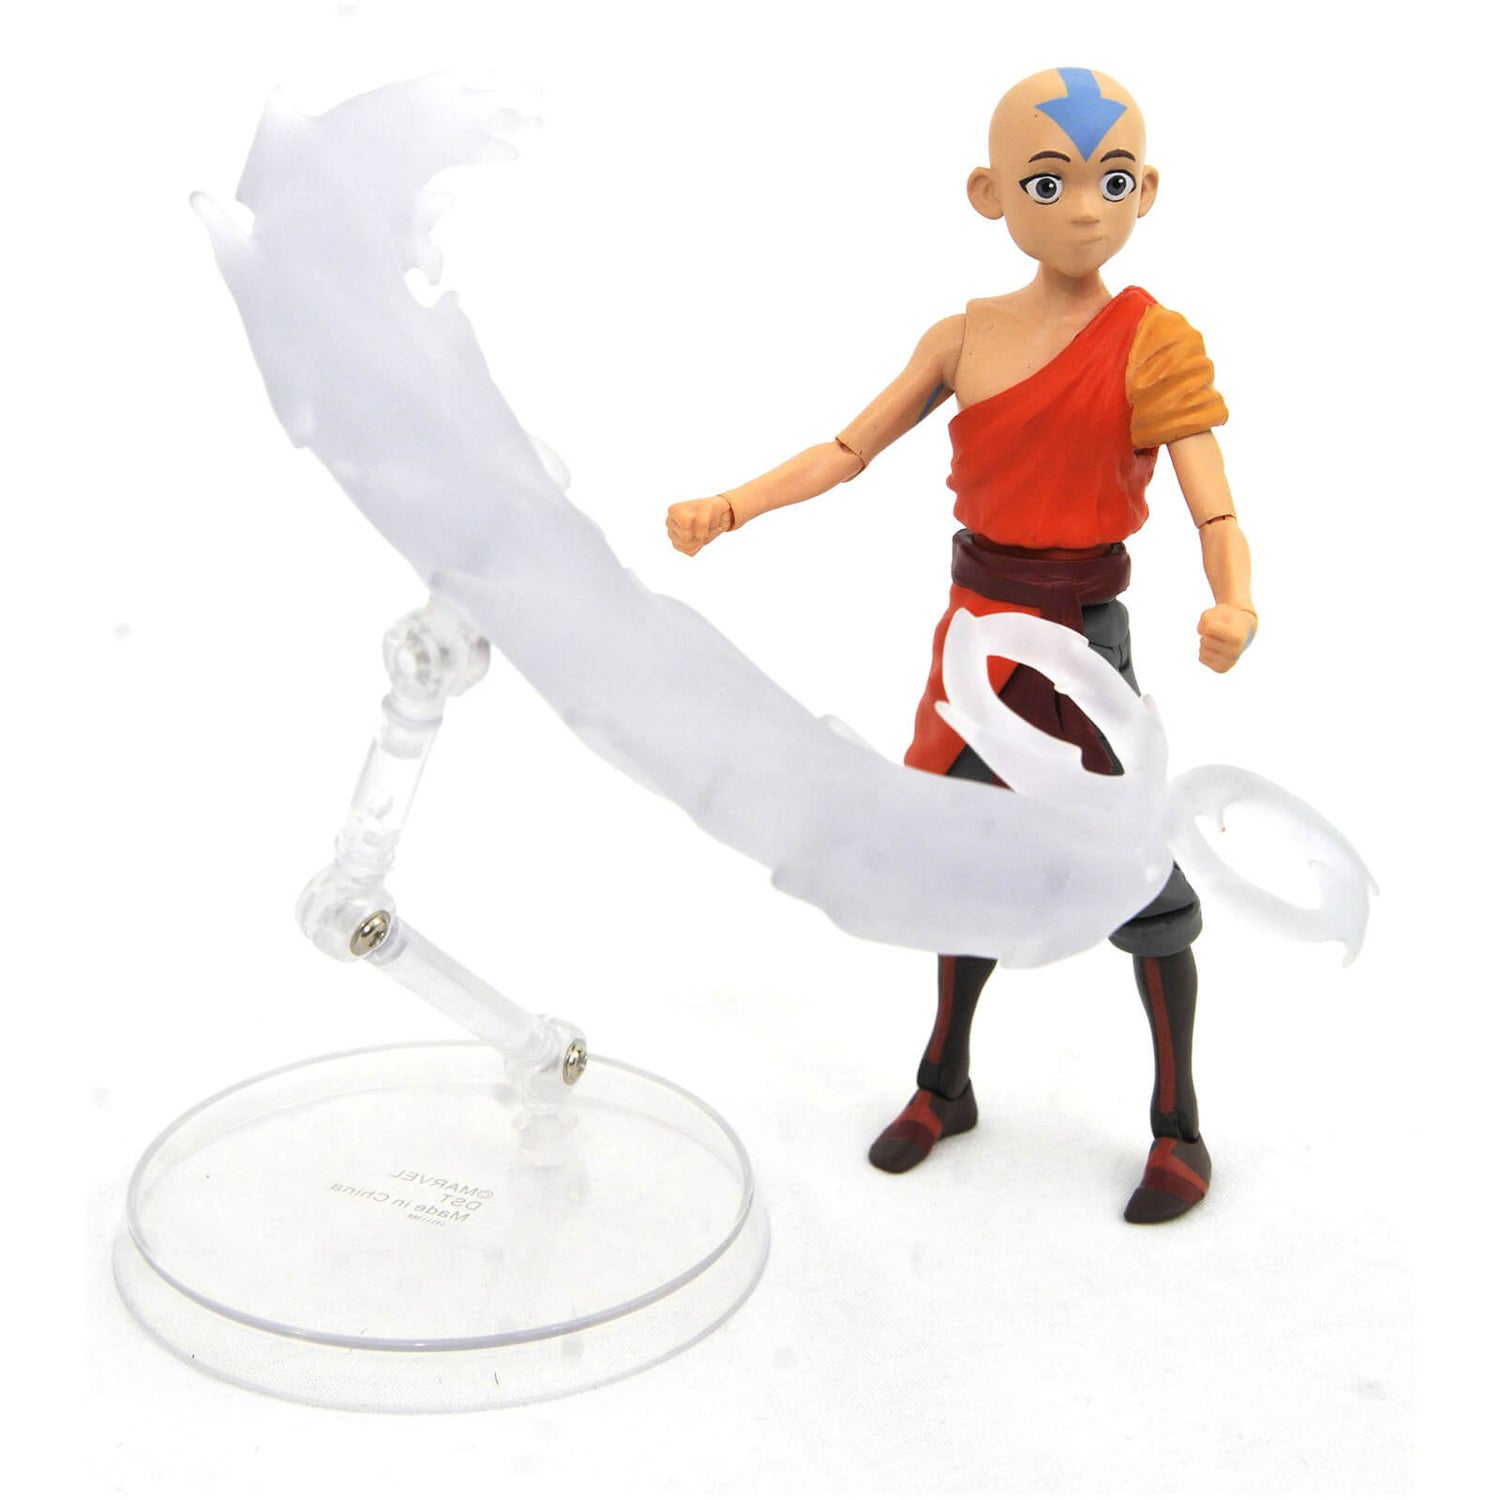 Diamond Select Avatar: The Last Airbender Deluxe Action Figure - Aang